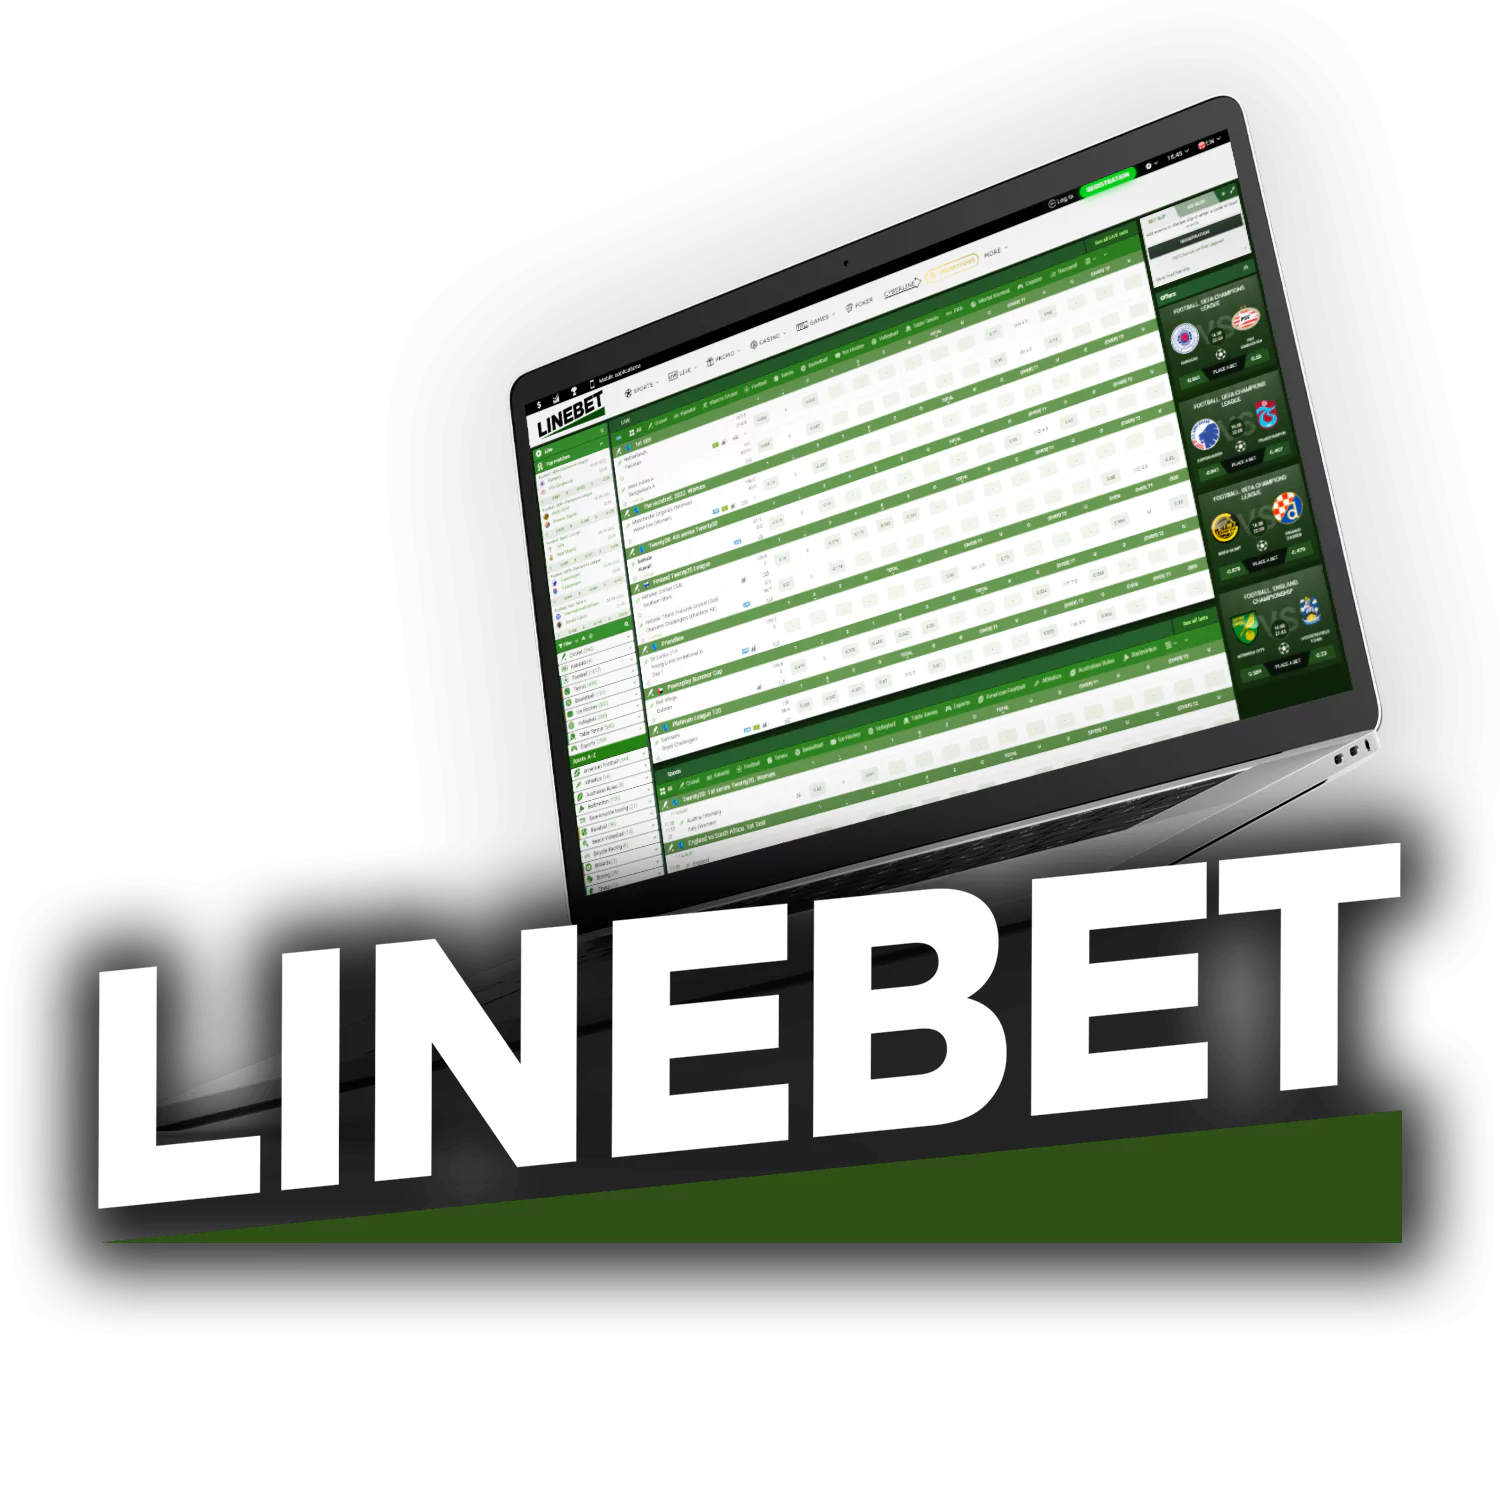 Learn how to download and start to use the Linebet PC client for Windows or macOS.